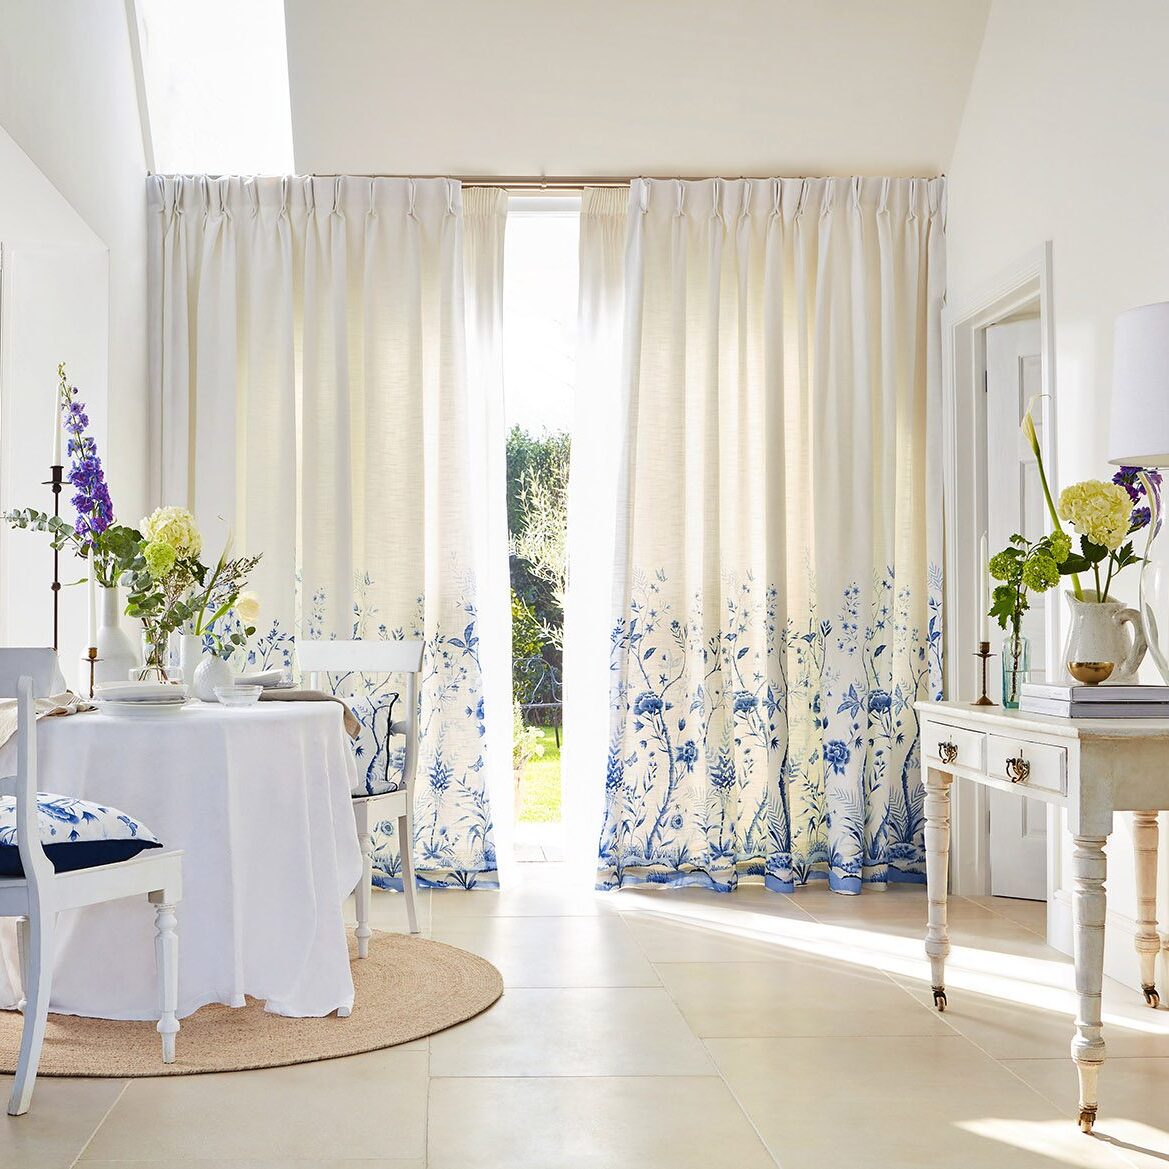 A Hampton's Style interior with white and blue decor